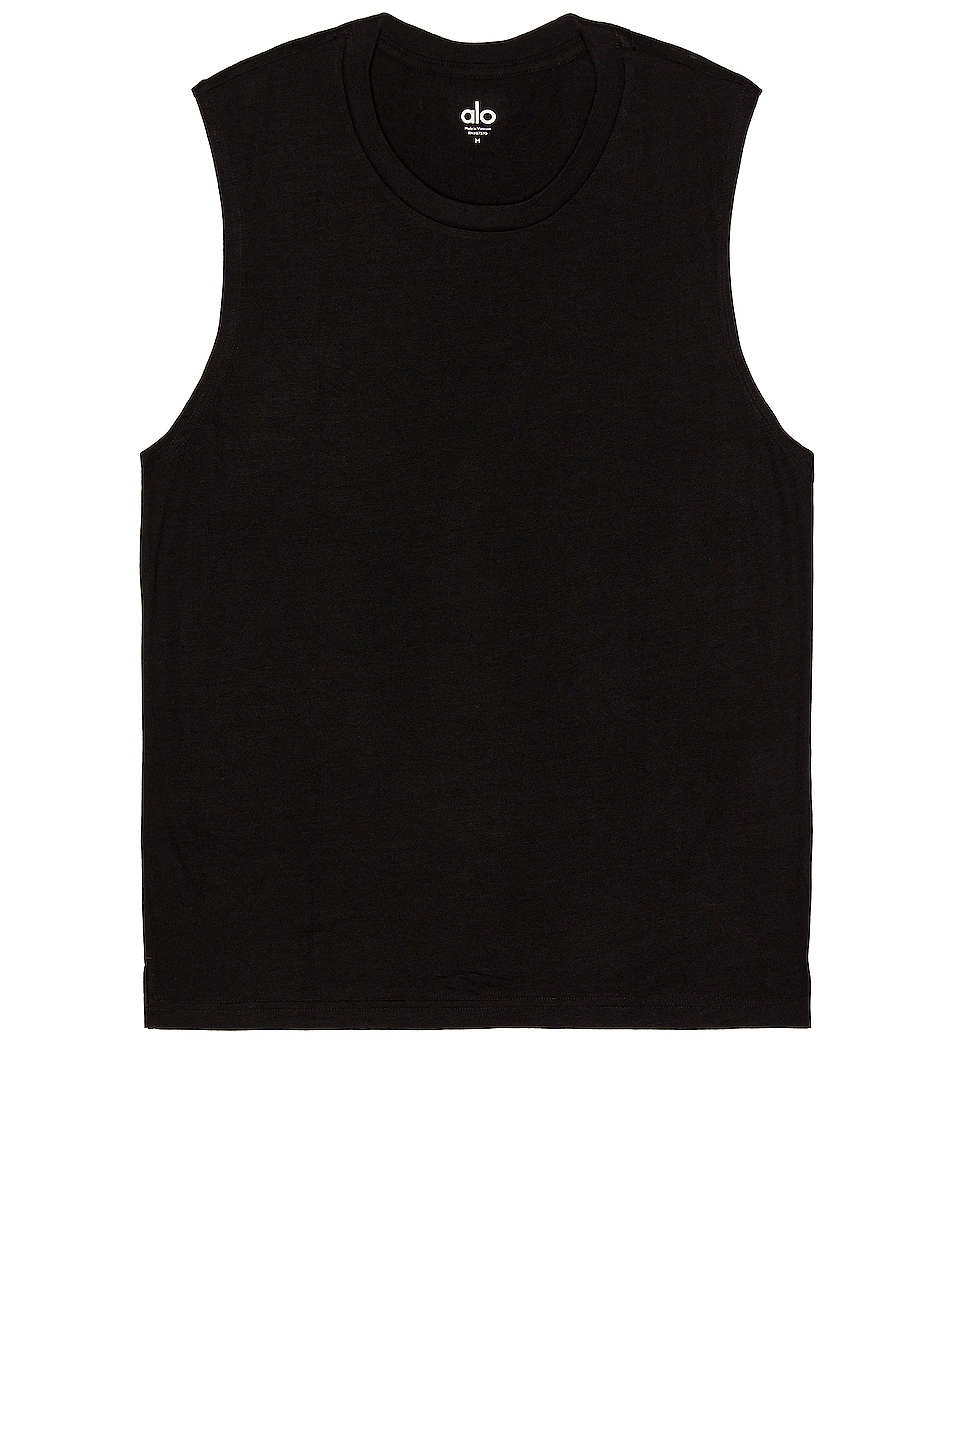 Image 1 of alo The Triumph Muscles Tank in Black